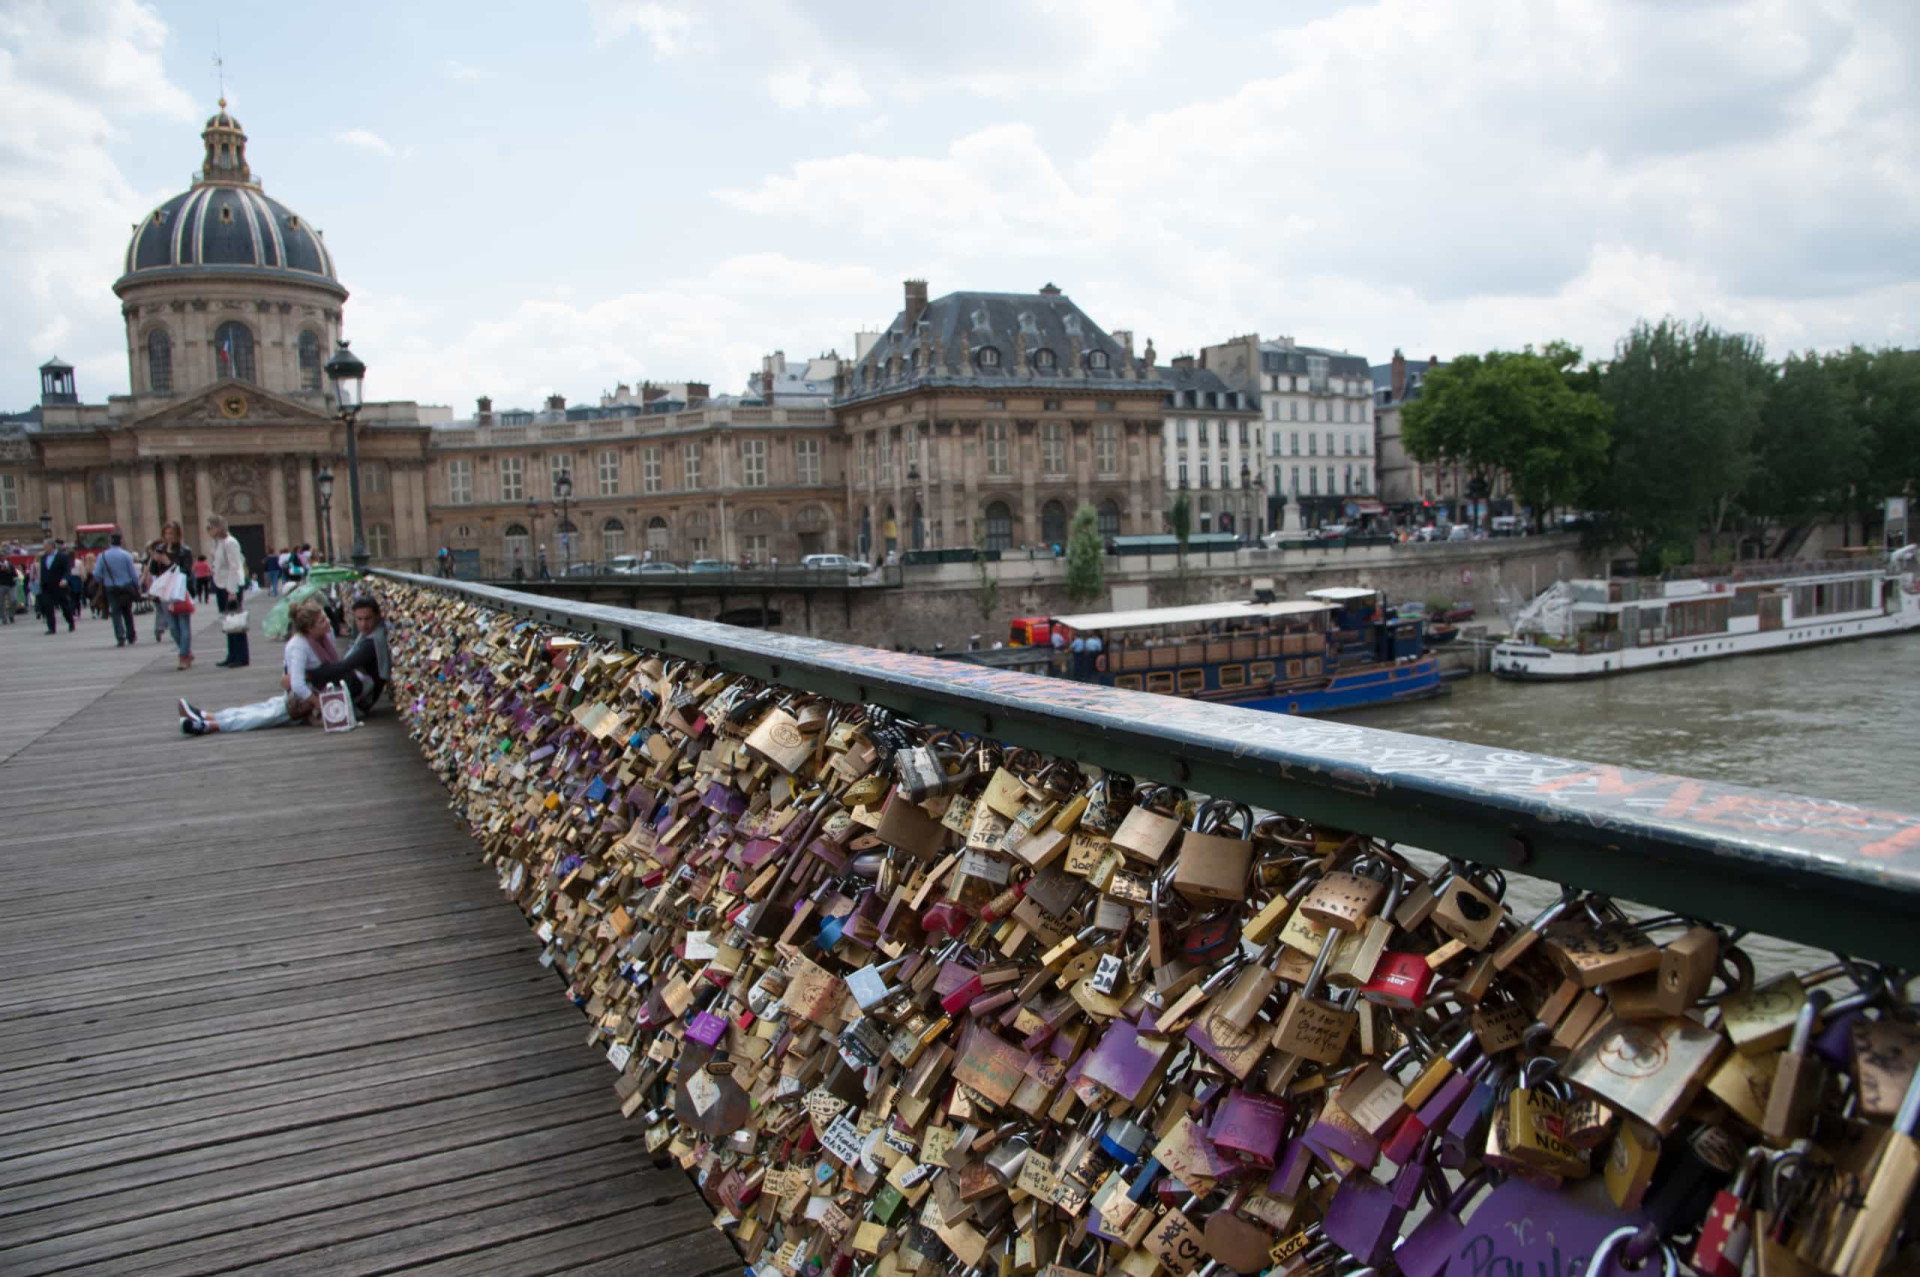 <p>Concerns for the structural integrity and aesthetic appeal of Pont des Arts pedestrian <a href="https://www.starsinsider.com/travel/206237/the-worlds-most-remarkable-bridges" rel="noopener">bridge</a> in Paris were voiced after tourists got in the habit of attaching padlocks (love locks) to the railing on the side of the bridge, then tossing the key into the Seine River below. At one point, an estimated 700,000 locks covered the bridge. They have since been removed.</p><p>You may also like:<a href="https://www.starsinsider.com/n/403131?utm_source=msn.com&utm_medium=display&utm_campaign=referral_description&utm_content=668561en-my"> The most inspirational business movies for entrepreneurs</a></p>